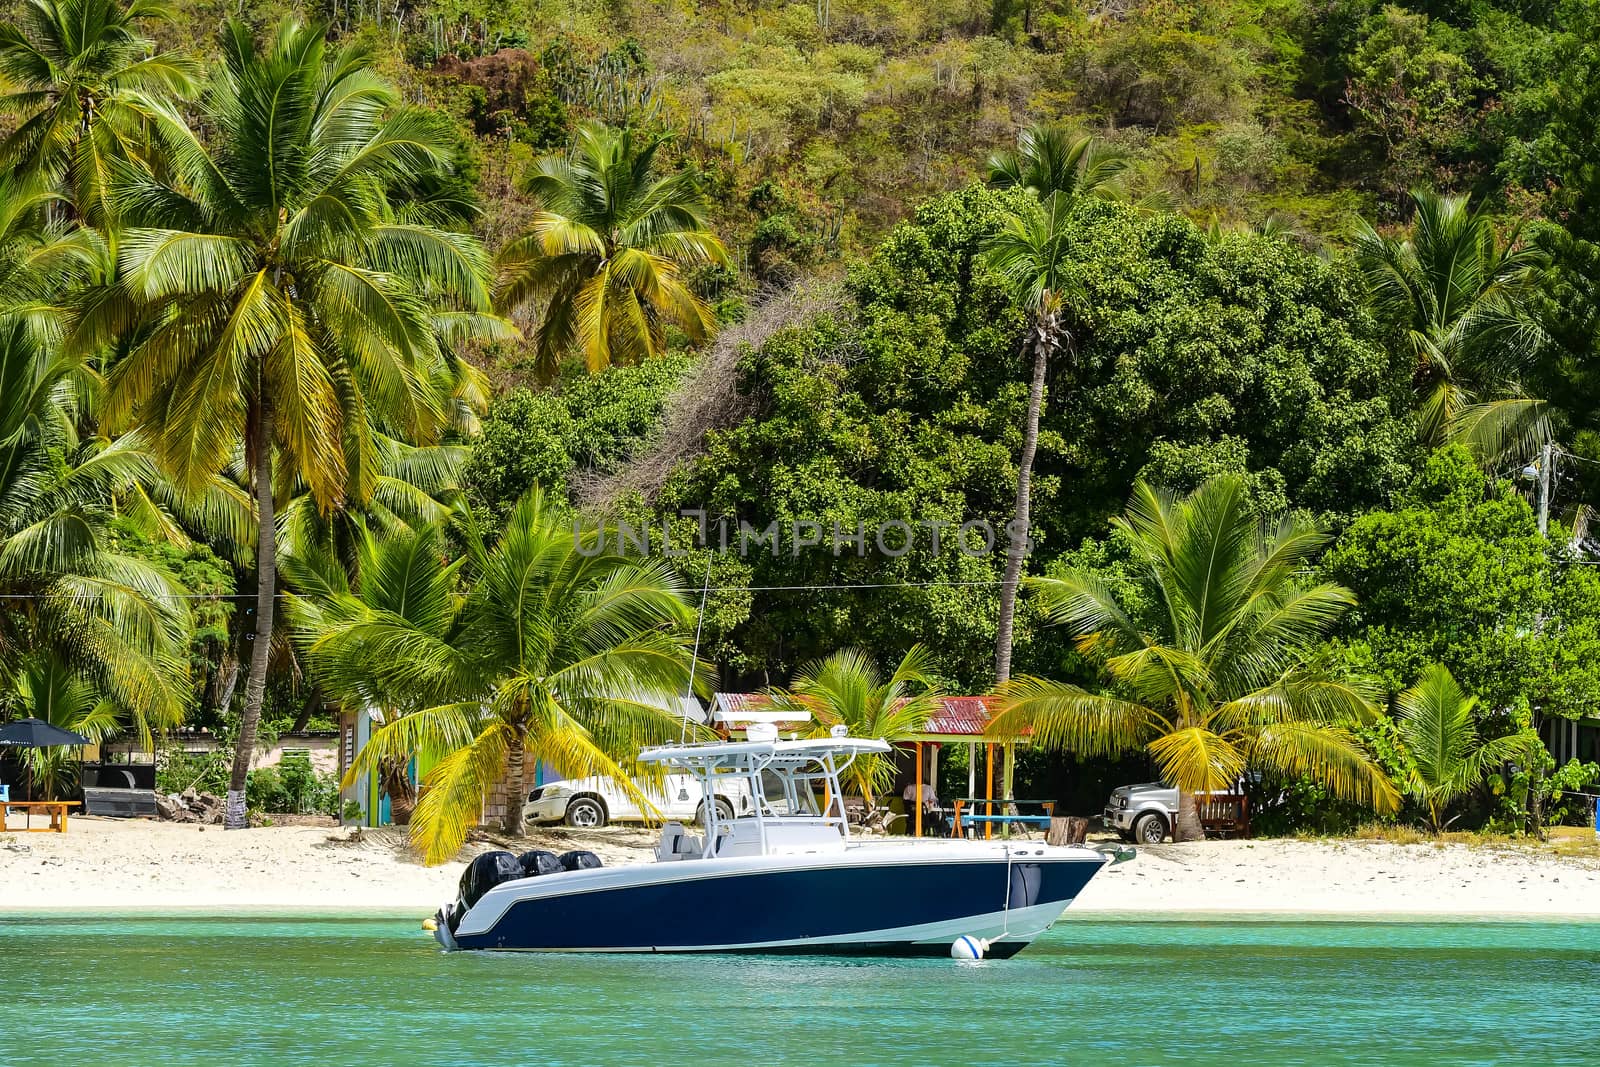 Ski boat anchored in front of sandy beach in British Virgin Isands